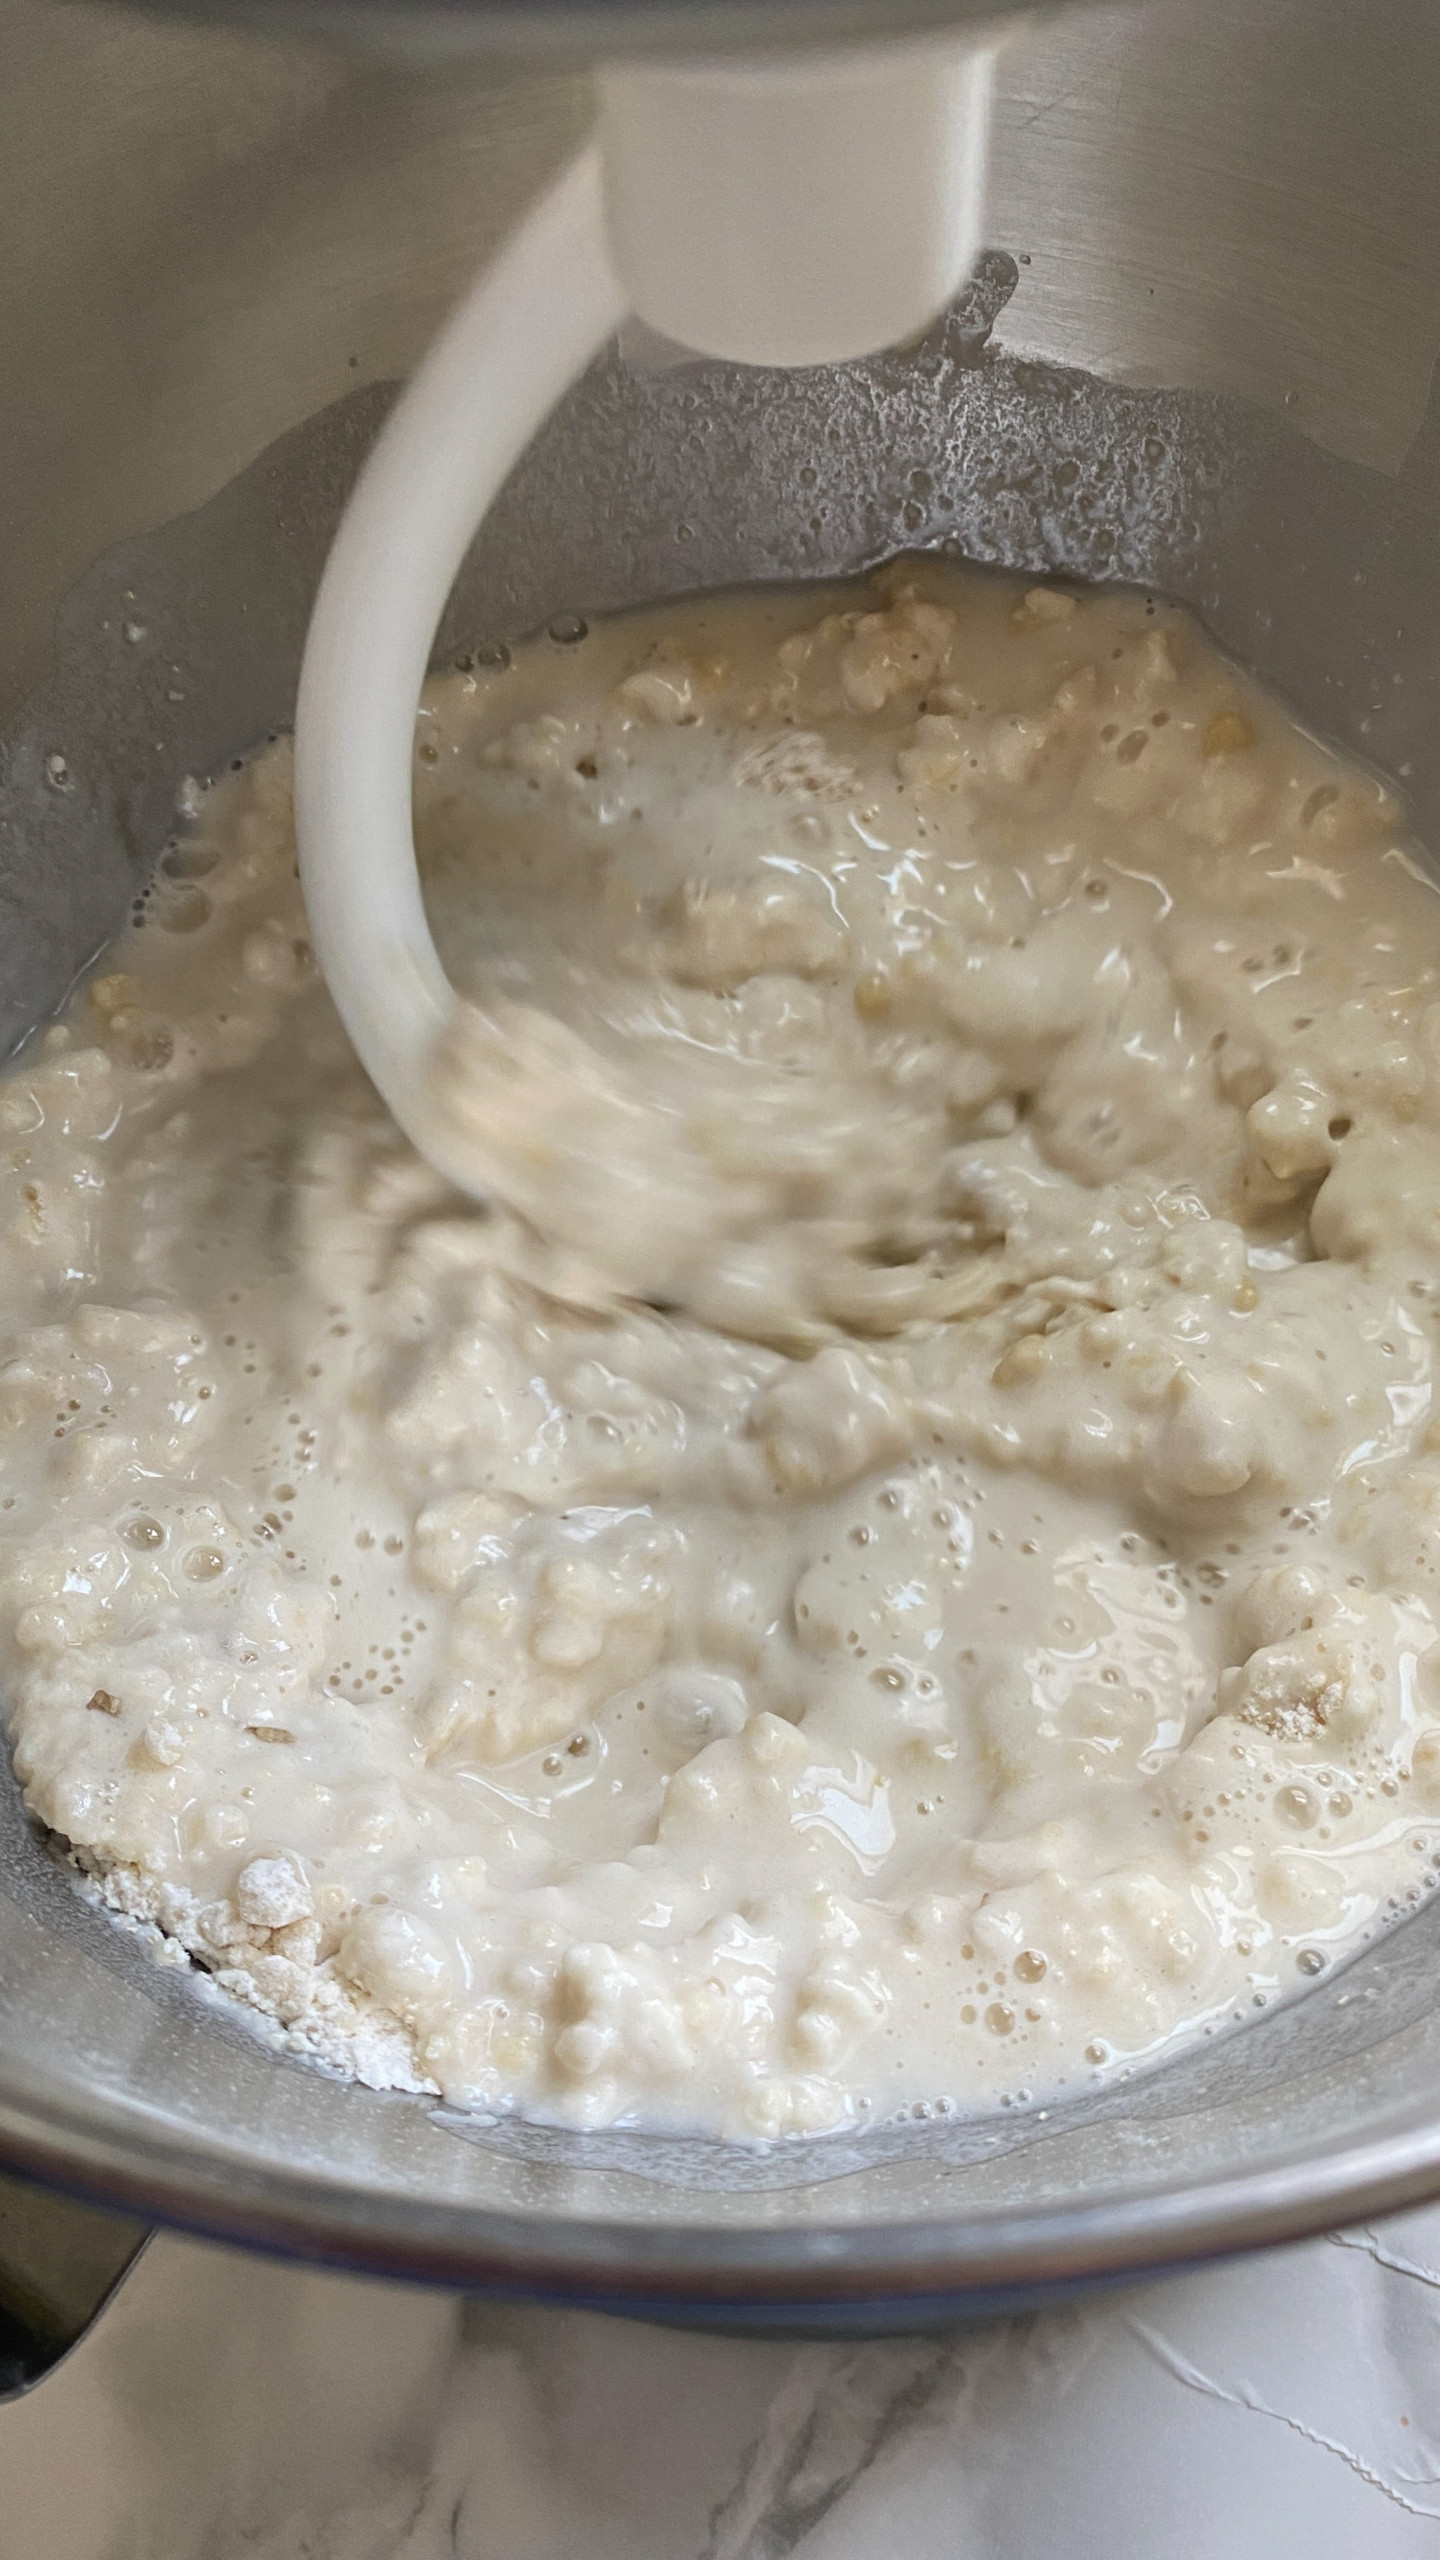 Mixing pizza dough in a stand mixer with a dough hook.